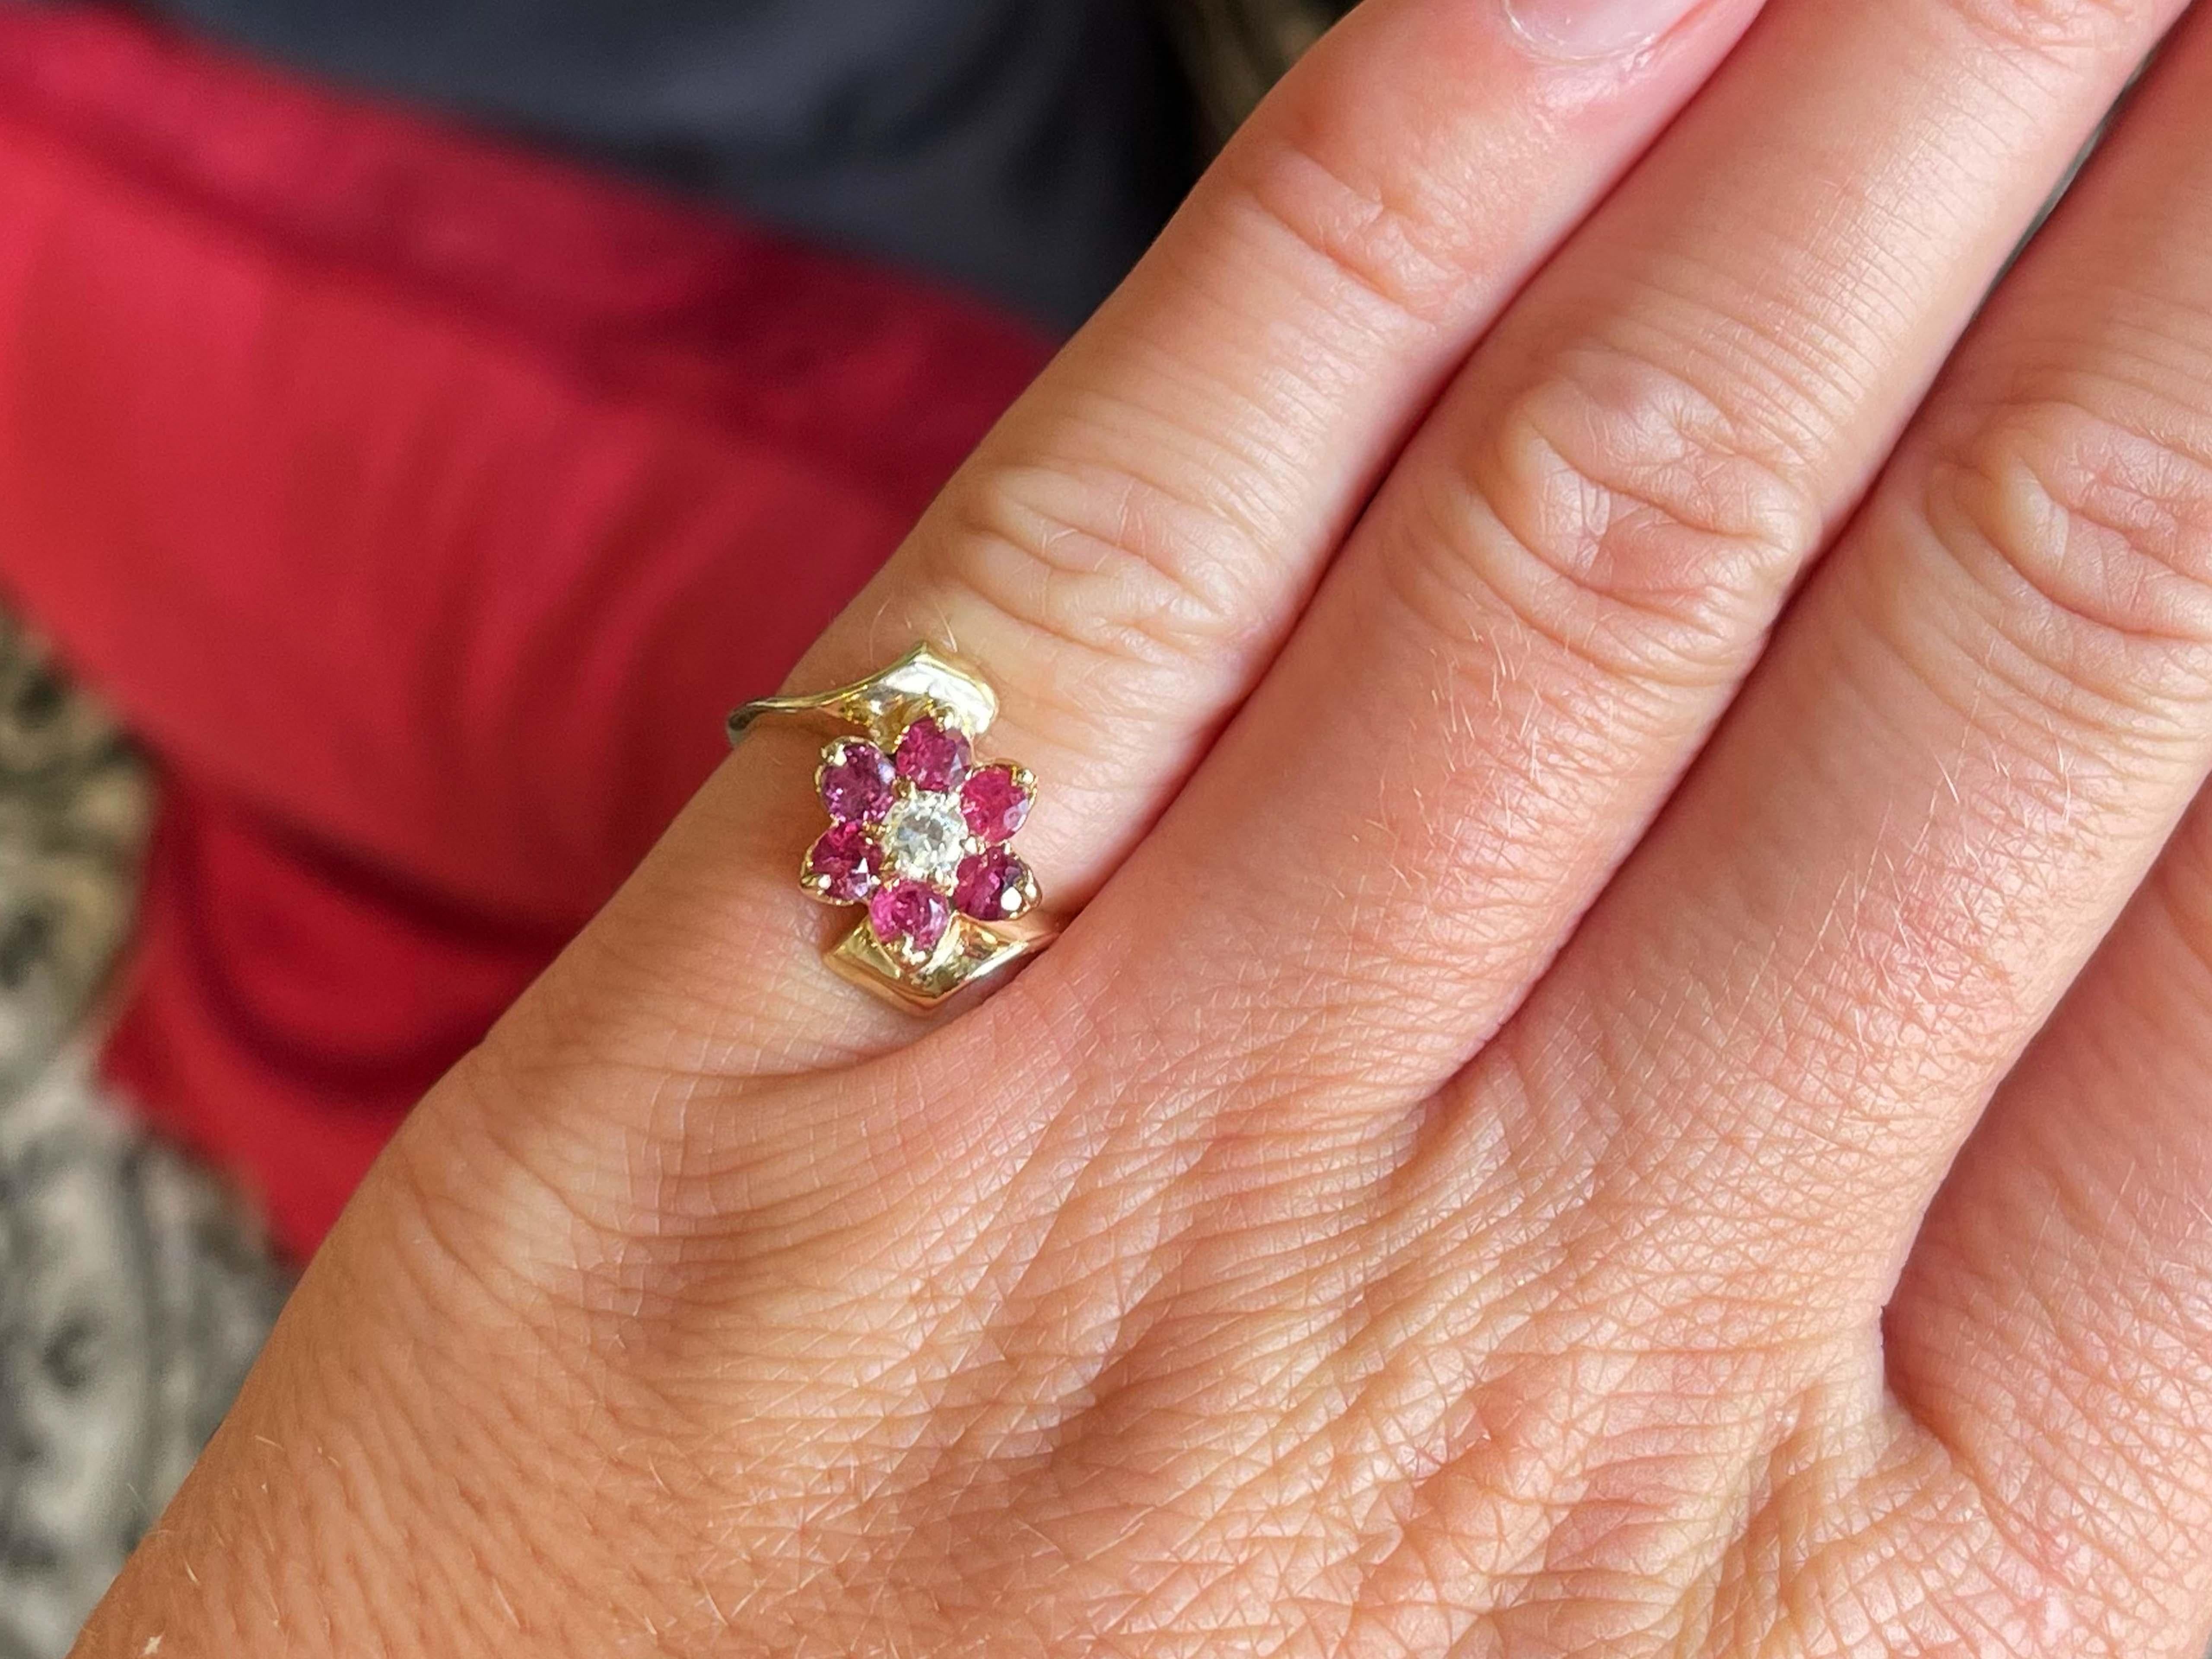 Item Specifications:

Metal: 14K Yellow Gold

Total Weight: 3.7 Grams

Gemstone Specifications:

Gemstones: 6 red rubies

Ruby Carat Weight: ~0.50 carats

Diamond Carat Weight: 0.10 carats

Diamond Count: 1

Diamond Color: I

Diamond Clarity: